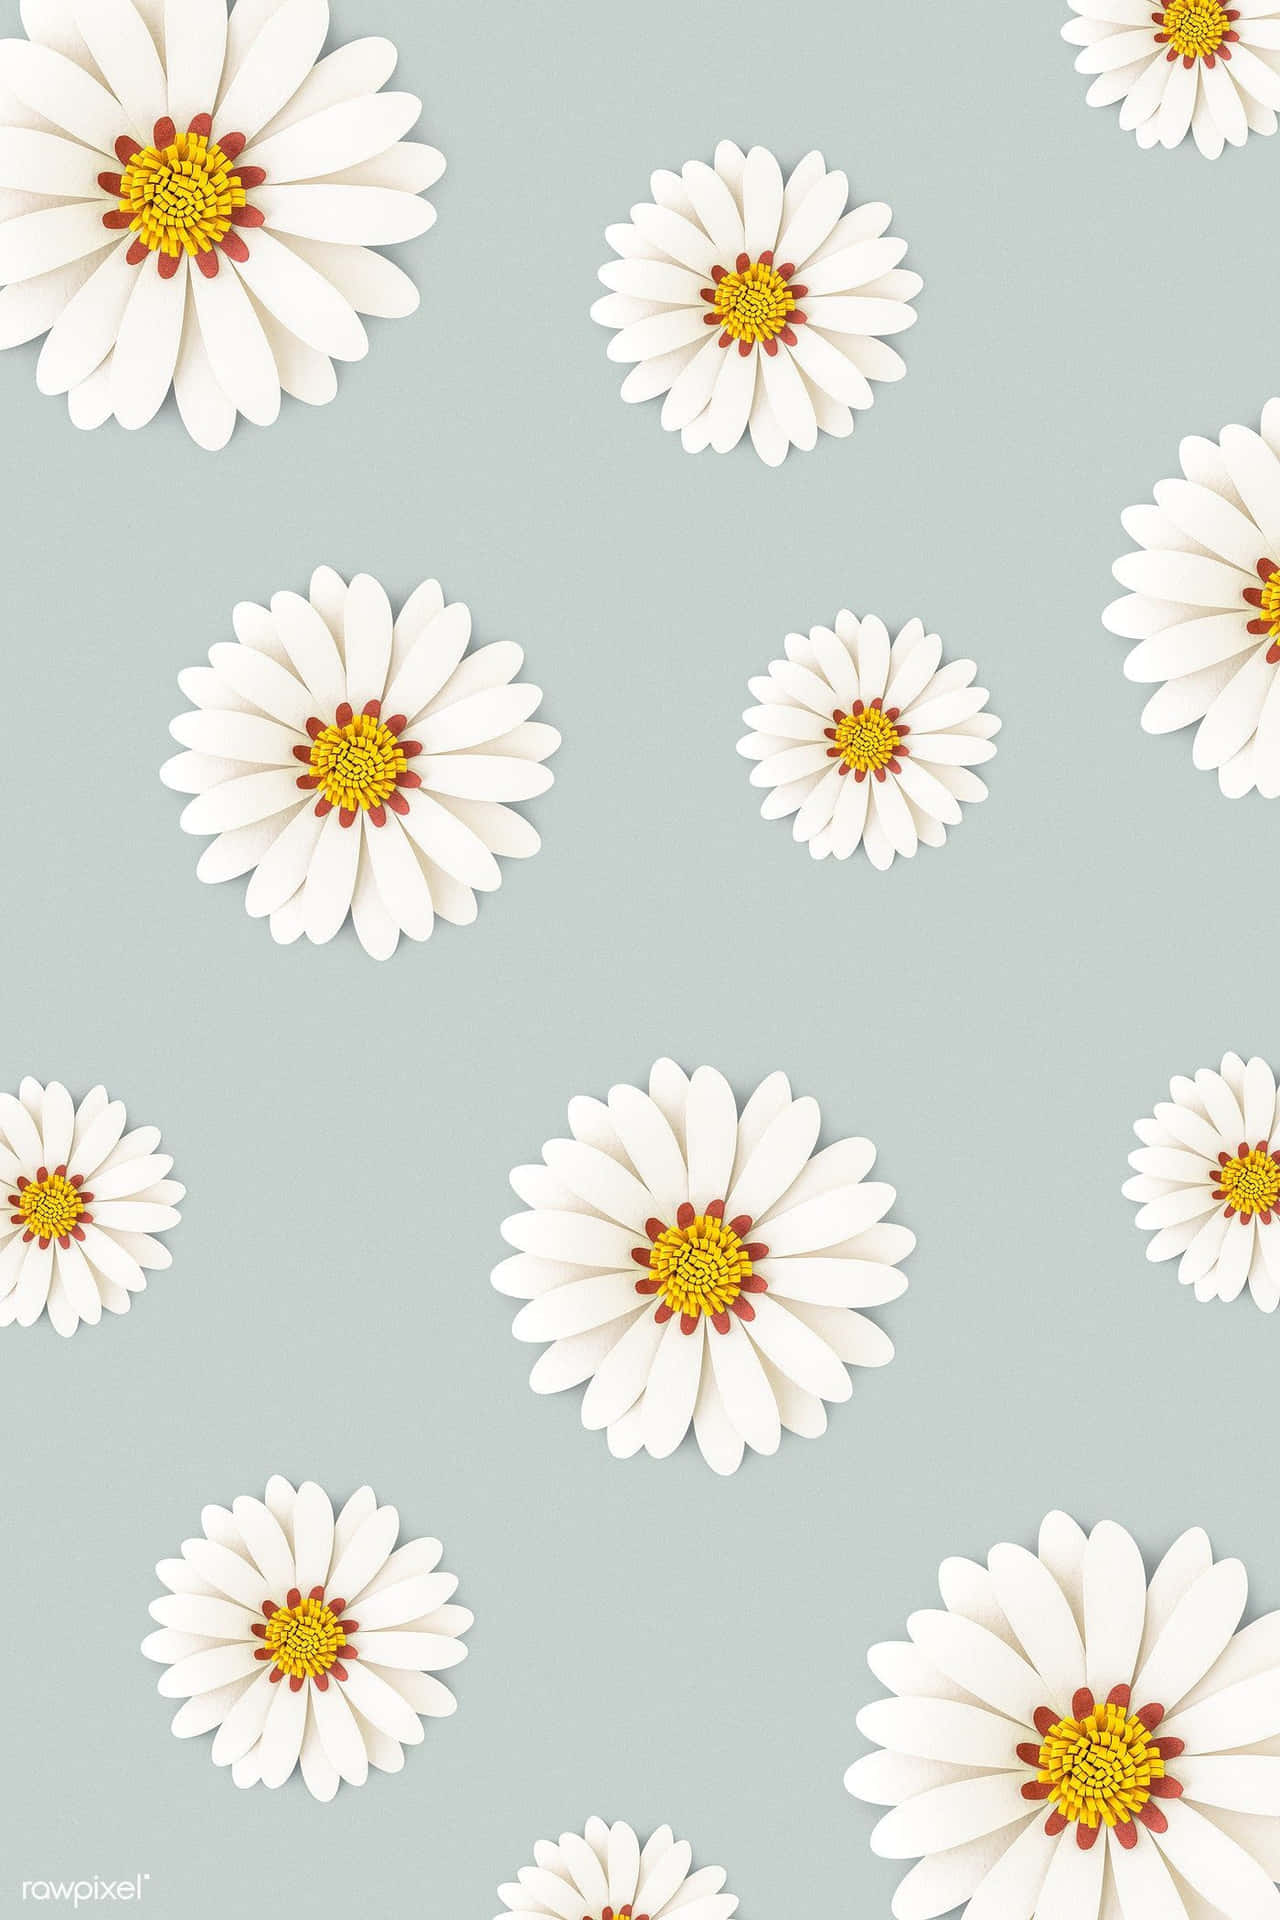 100+] Daisy Aesthetic Computer Wallpapers | Wallpapers.com